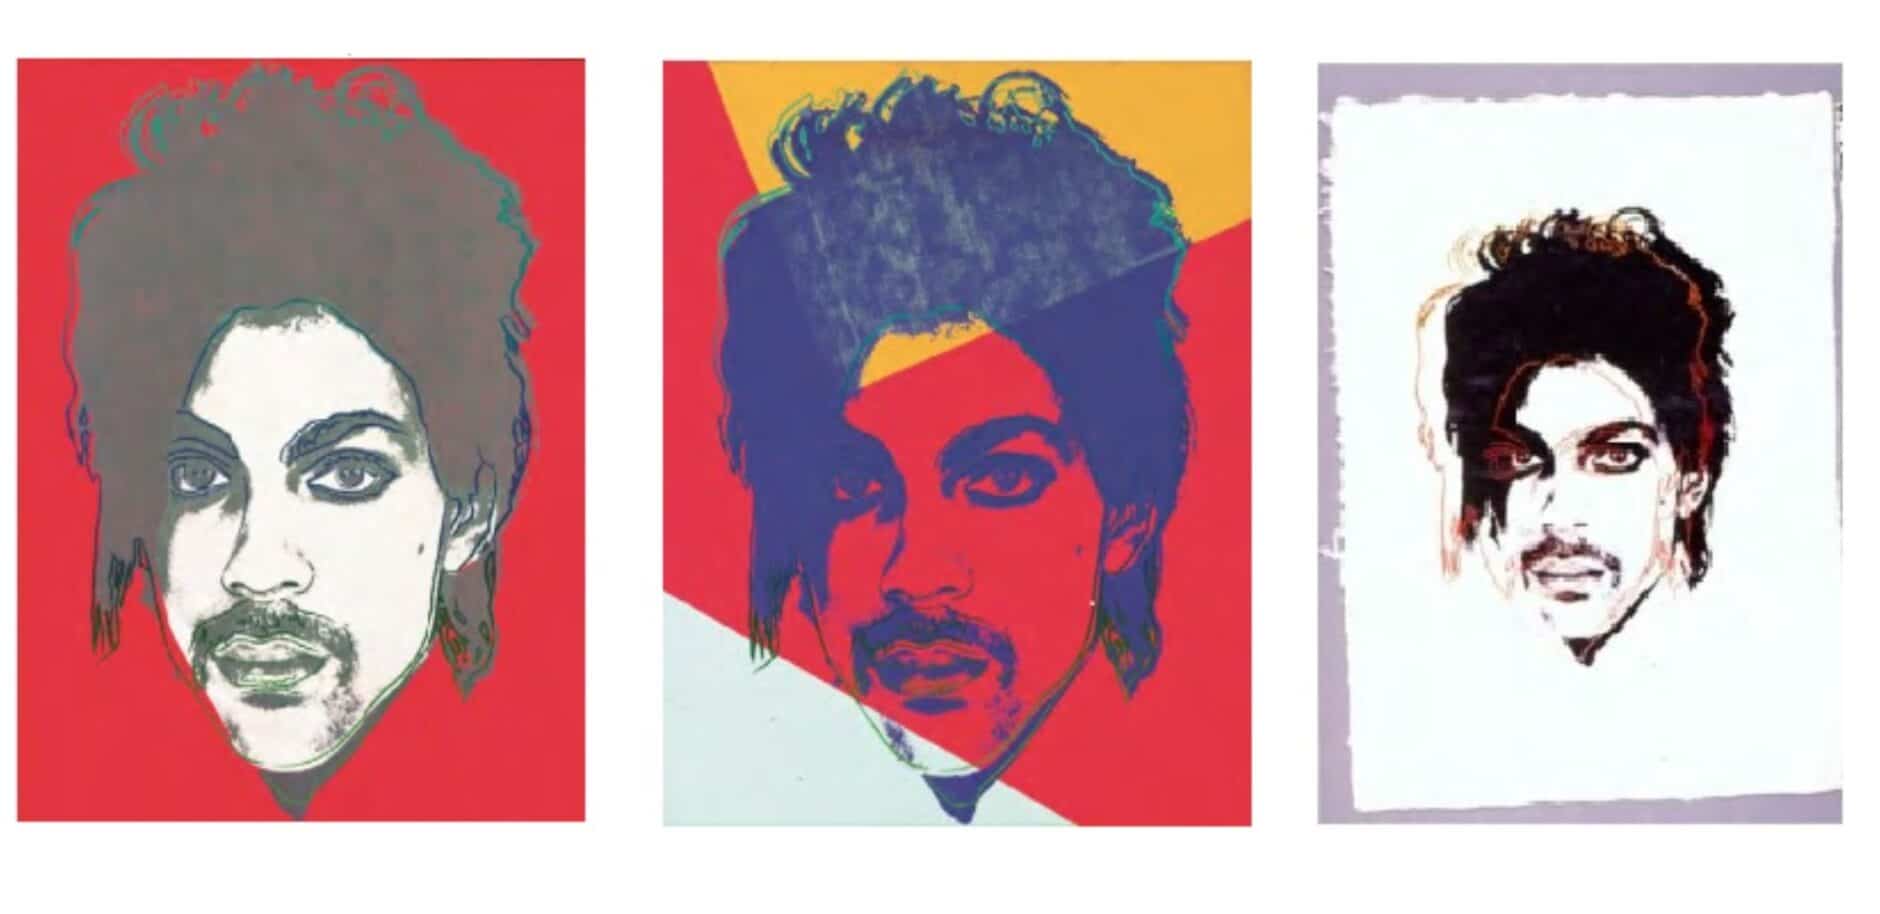 Warhol's Prince series brings pop art high | Courthouse News Service